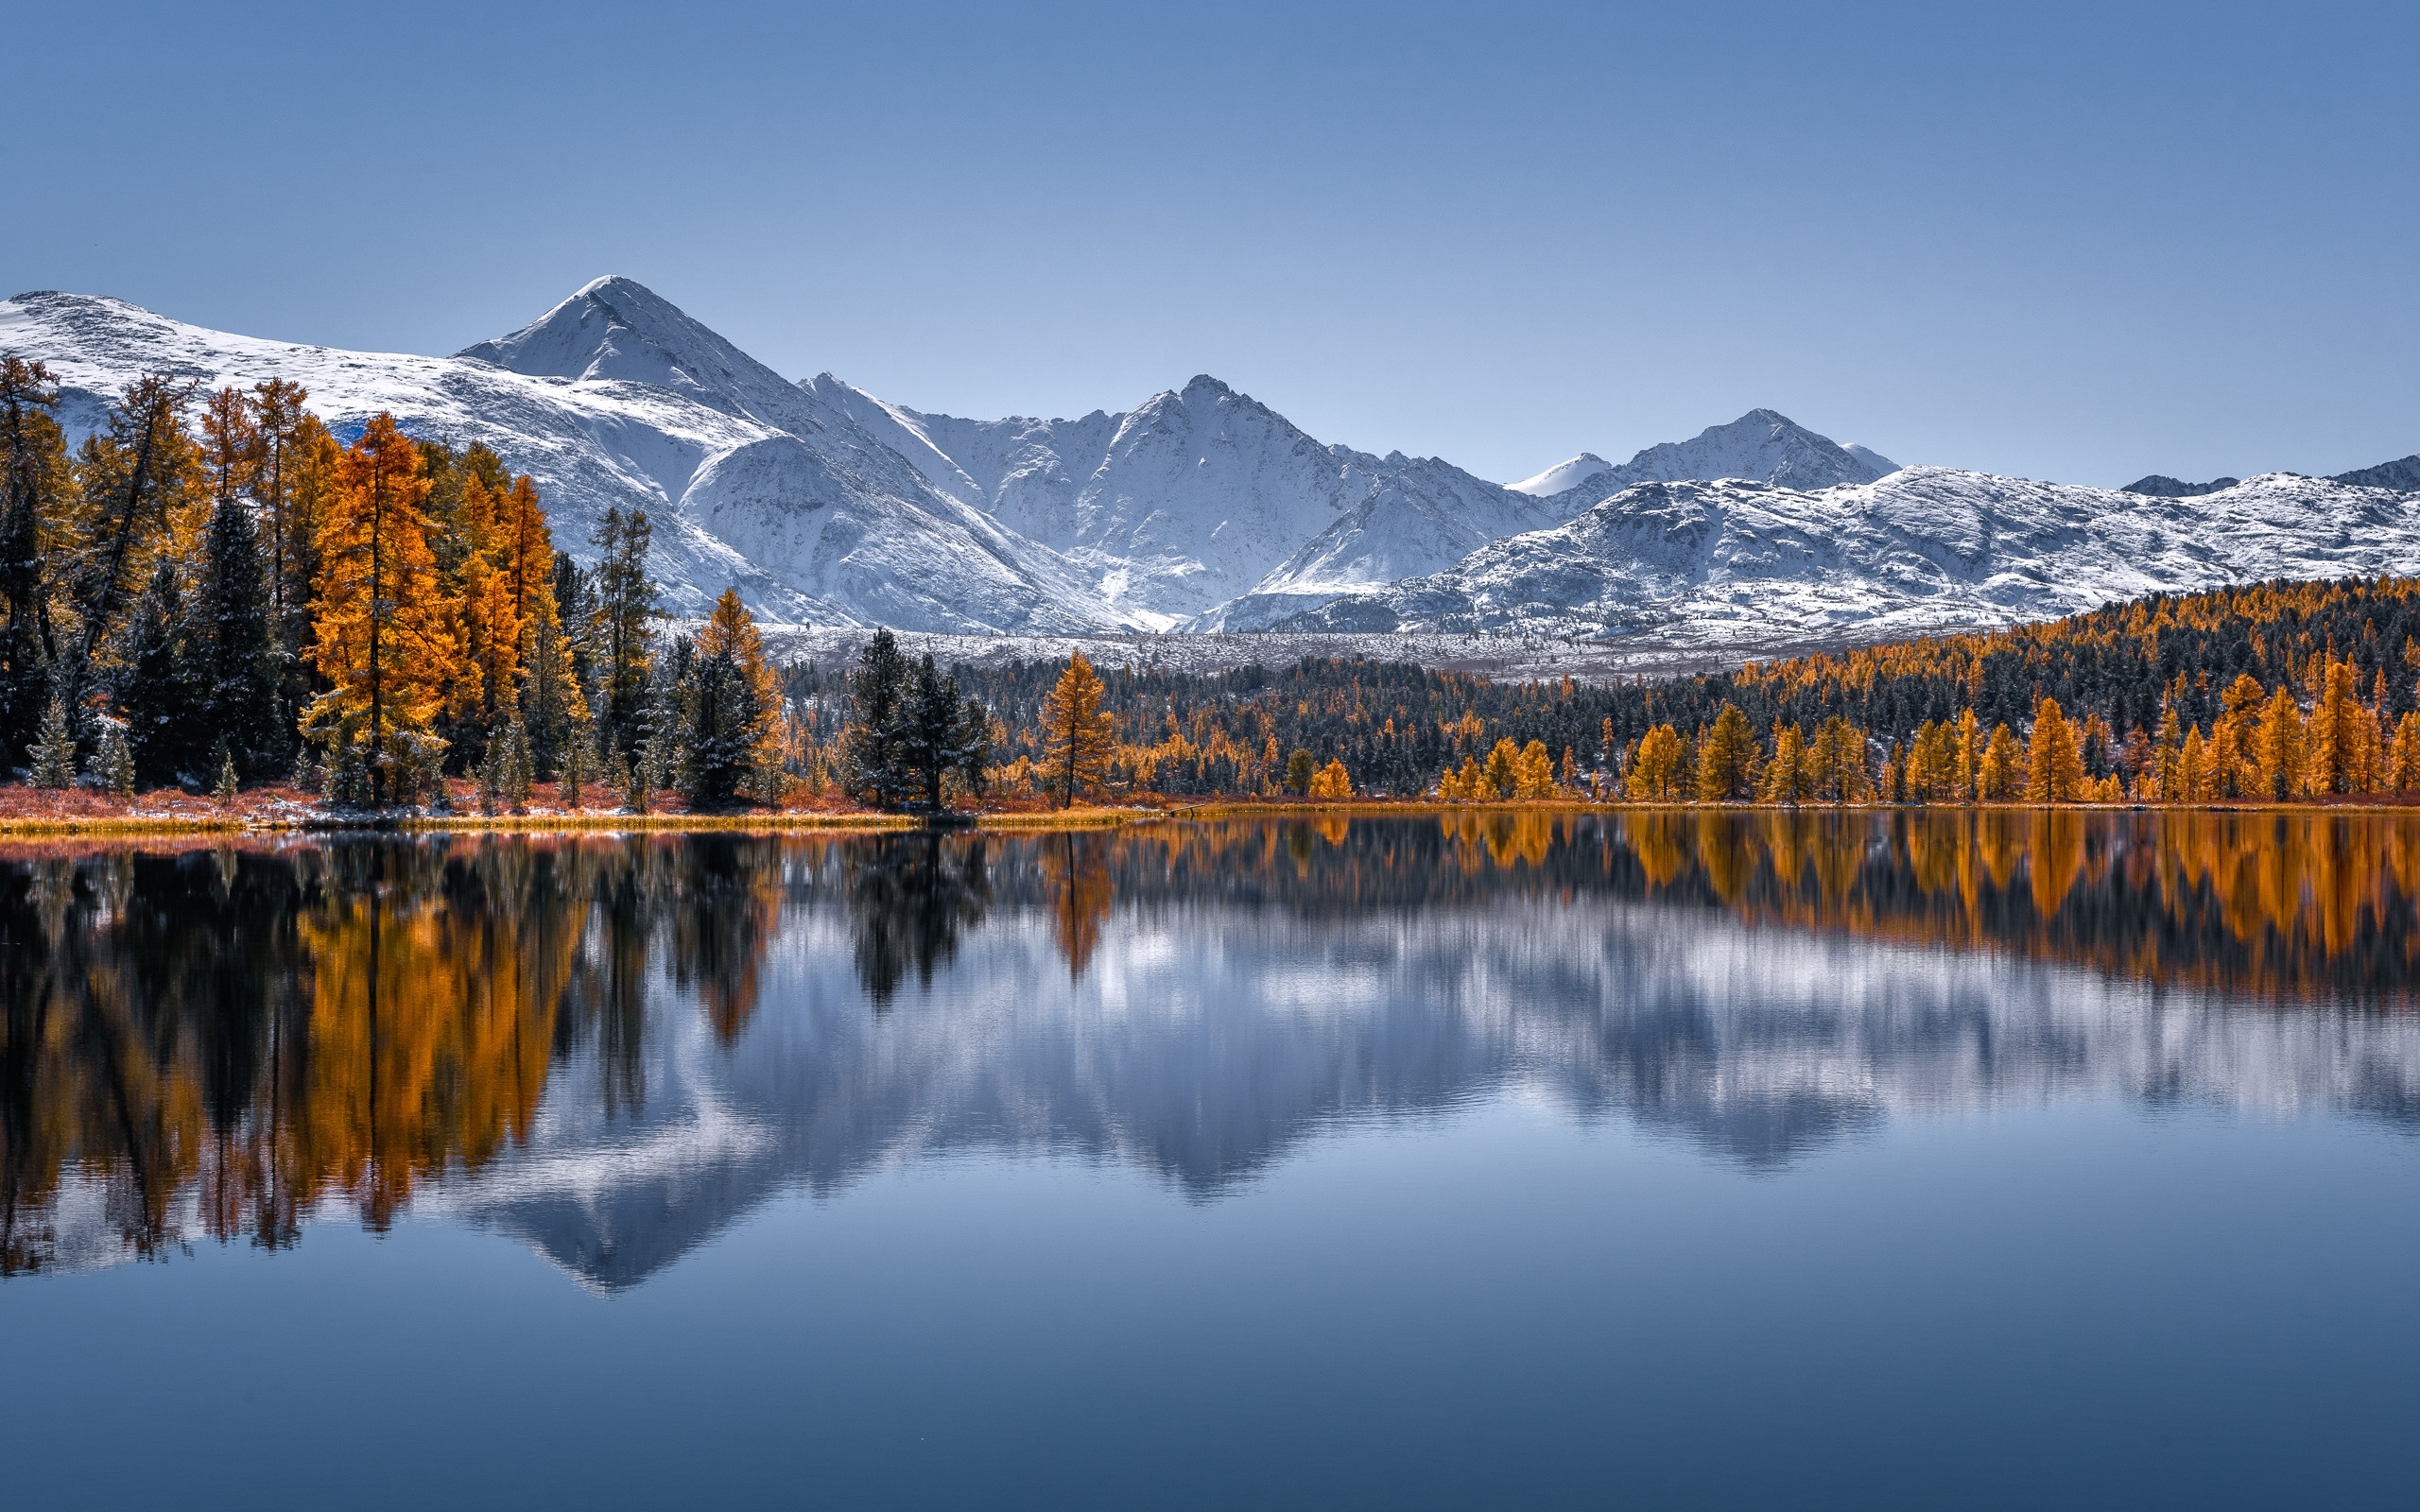 Wallpaper Russia, The Altai Mountains, lake, water reflection, trees